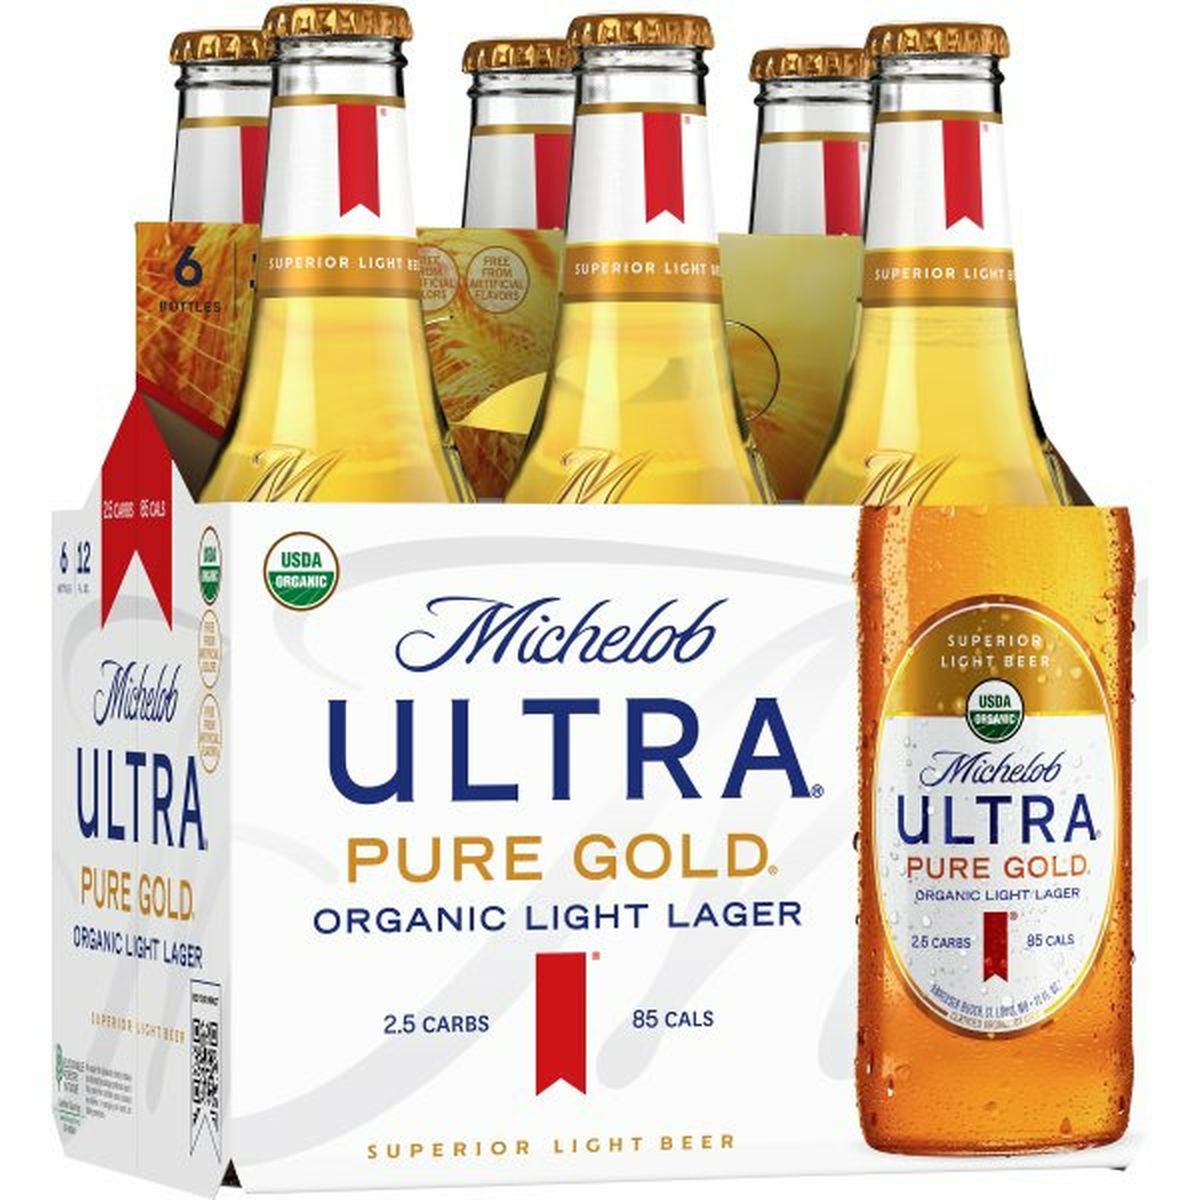 Calories in Michelob Pure Gold Organic Light Lager,  6/12 oz bottles